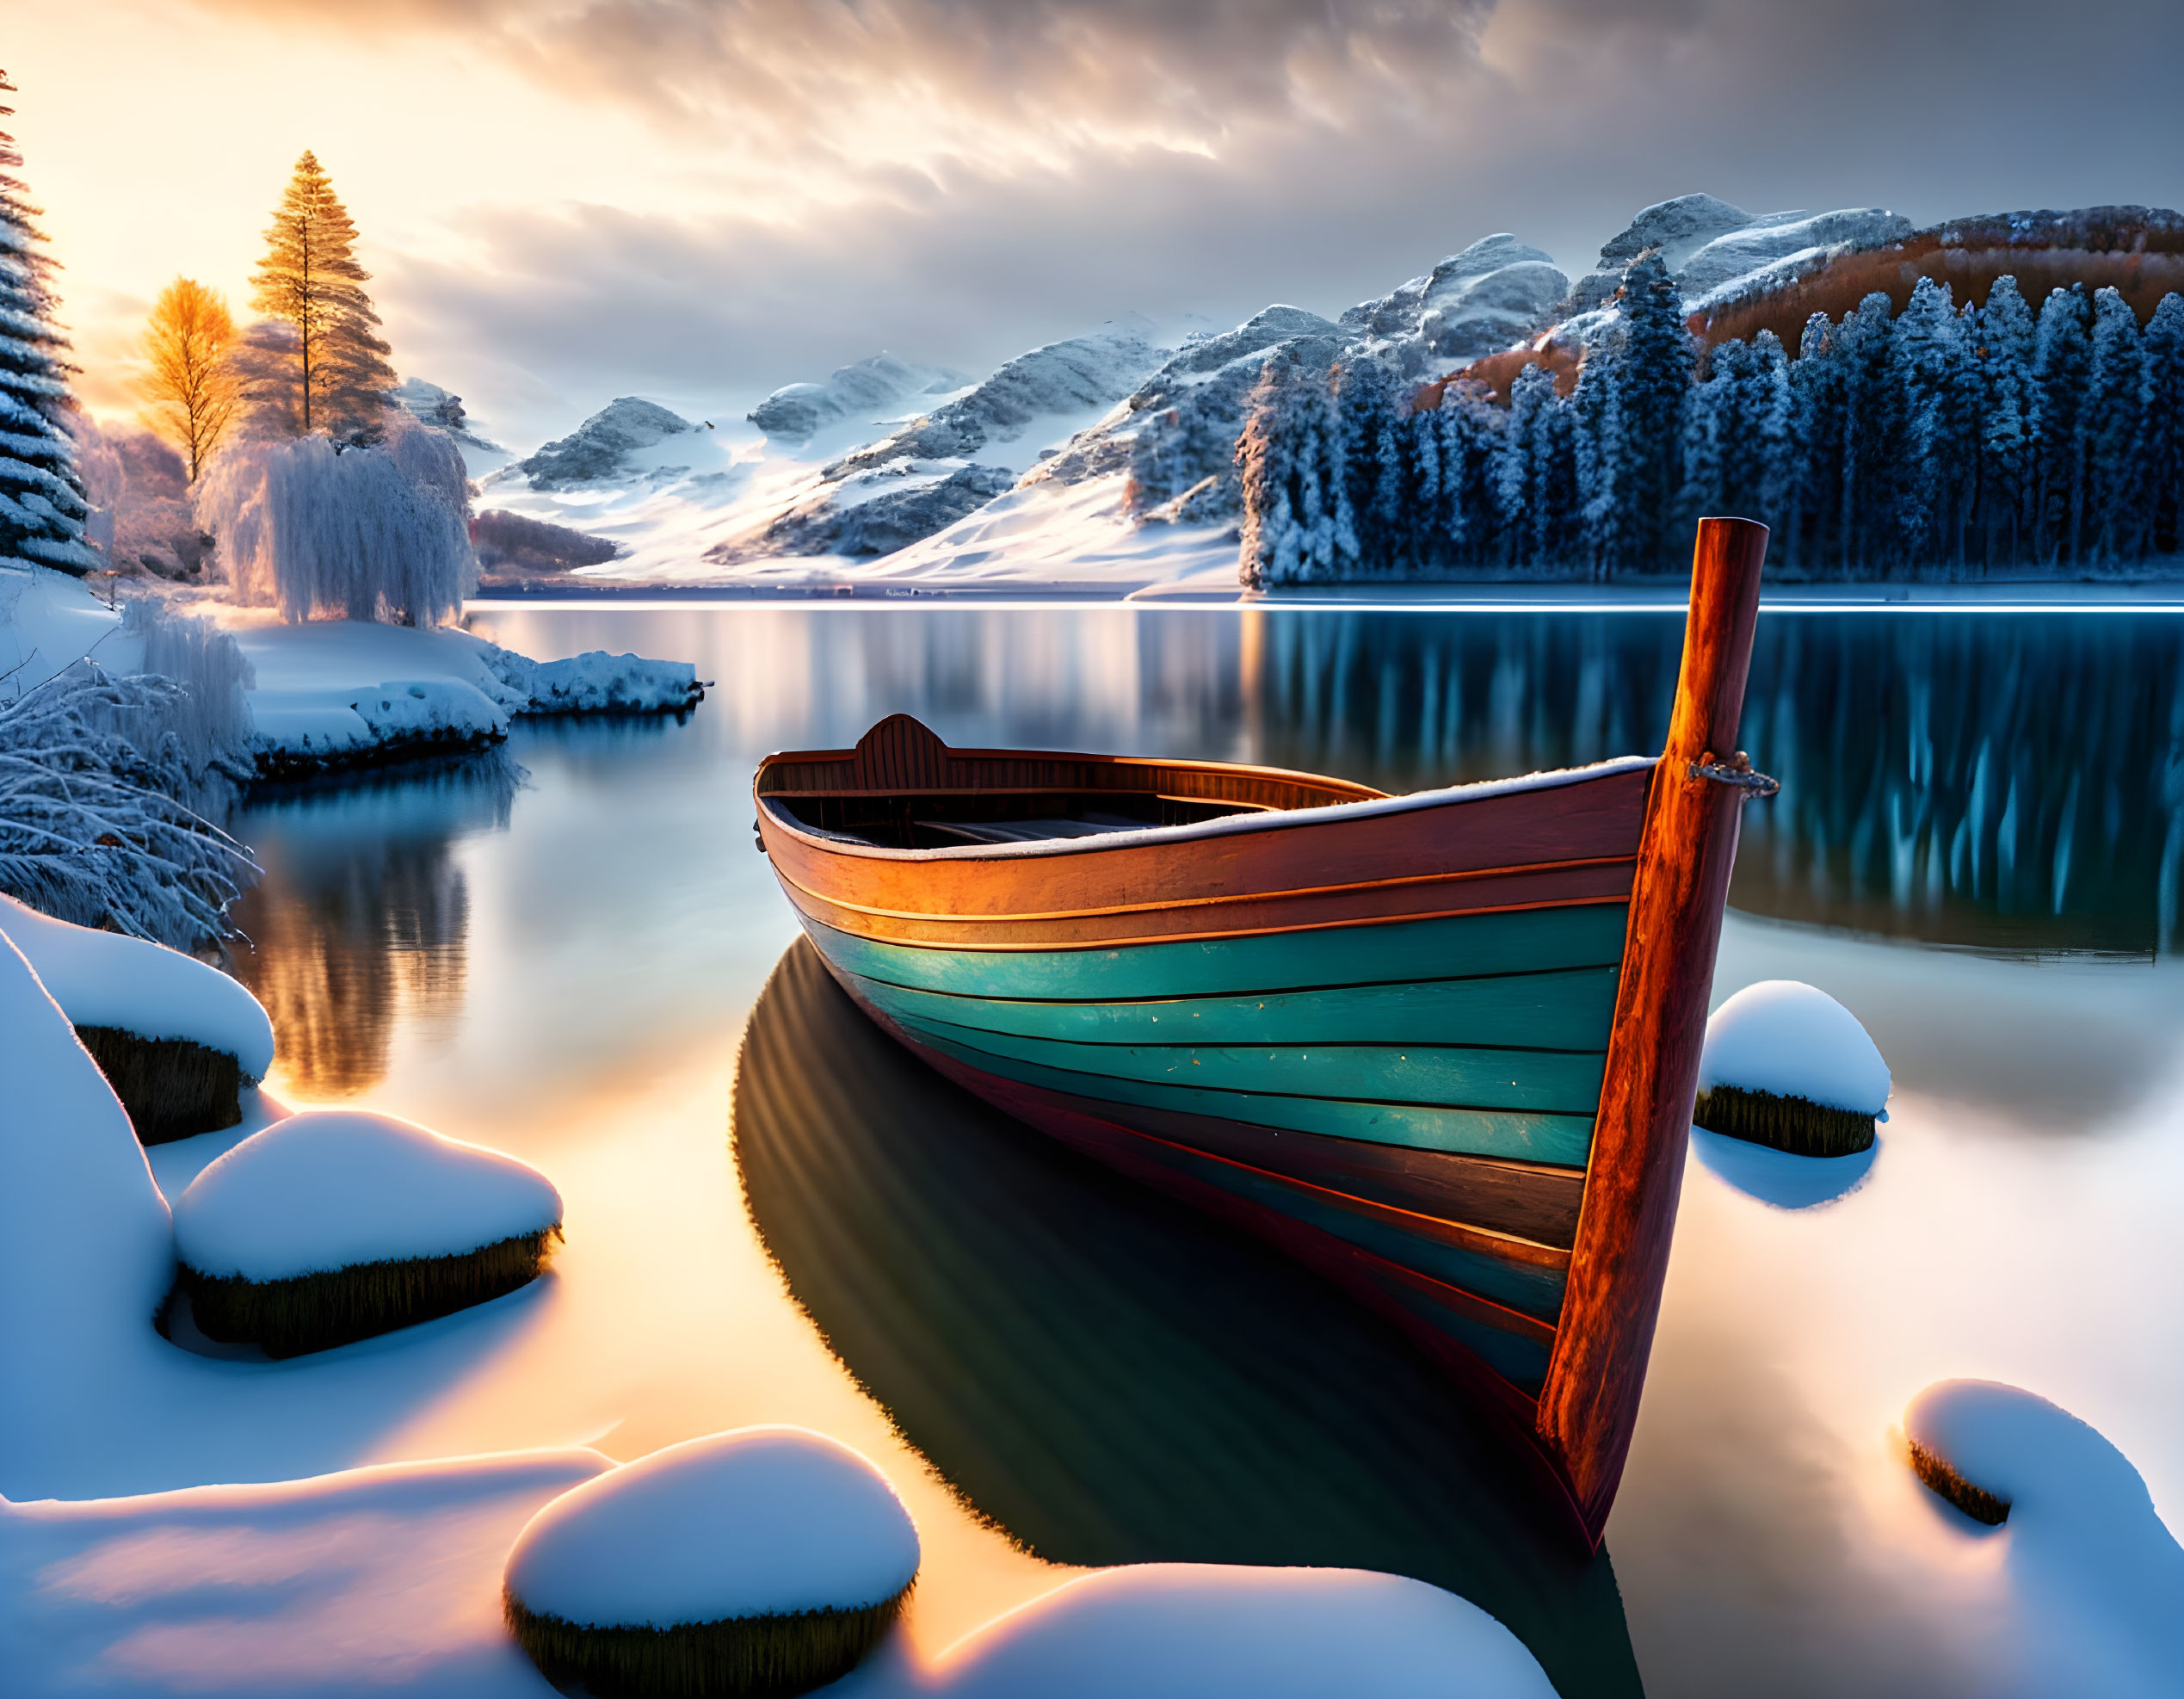 Image of a wooden boat on the Lake shore